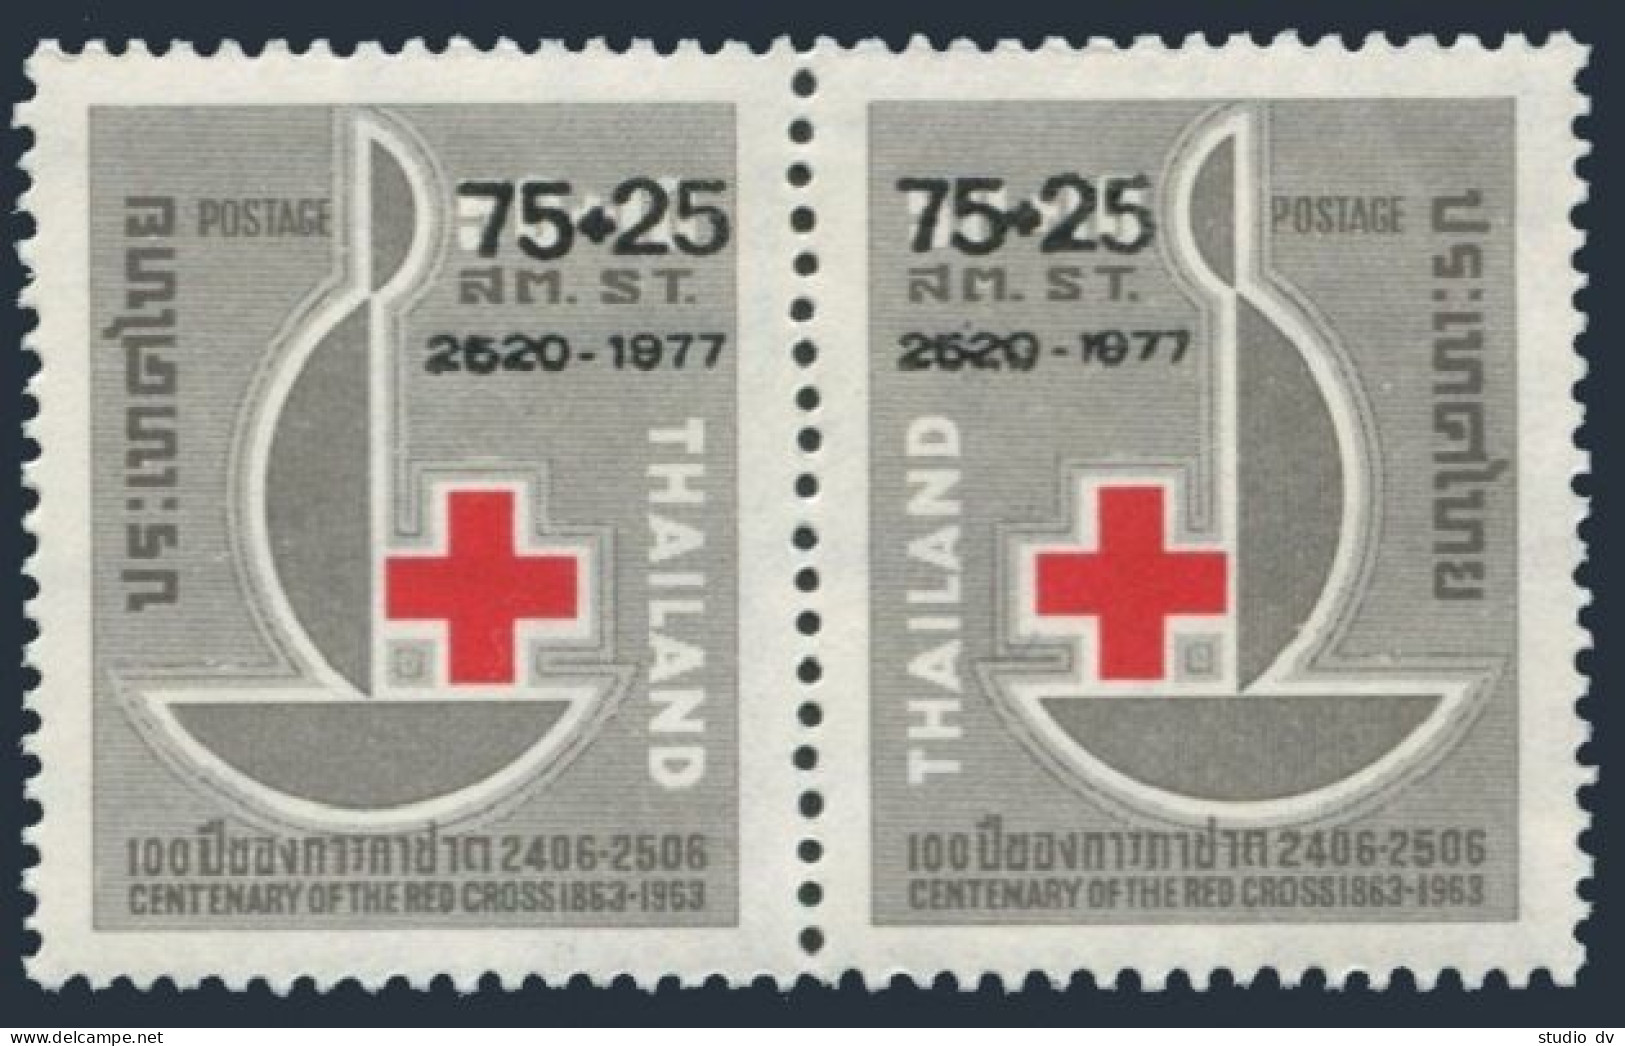 Thailand B51-B52a,MNH.Michel 839-840. 1977 Red Cross Surcharged 1977,new Value. - Thailand